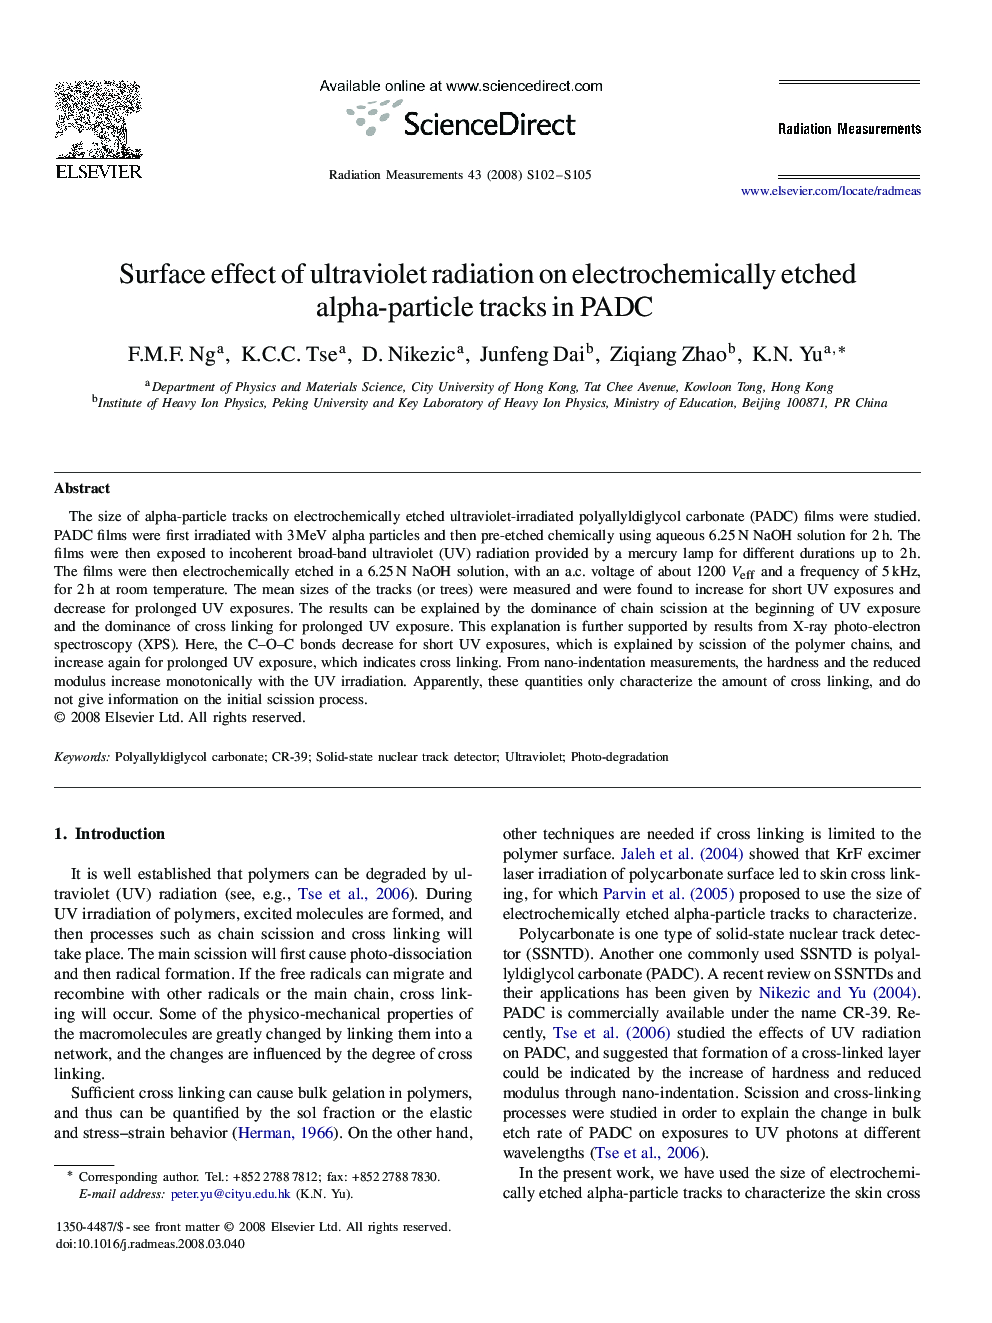 Surface effect of ultraviolet radiation on electrochemically etched alpha-particle tracks in PADC